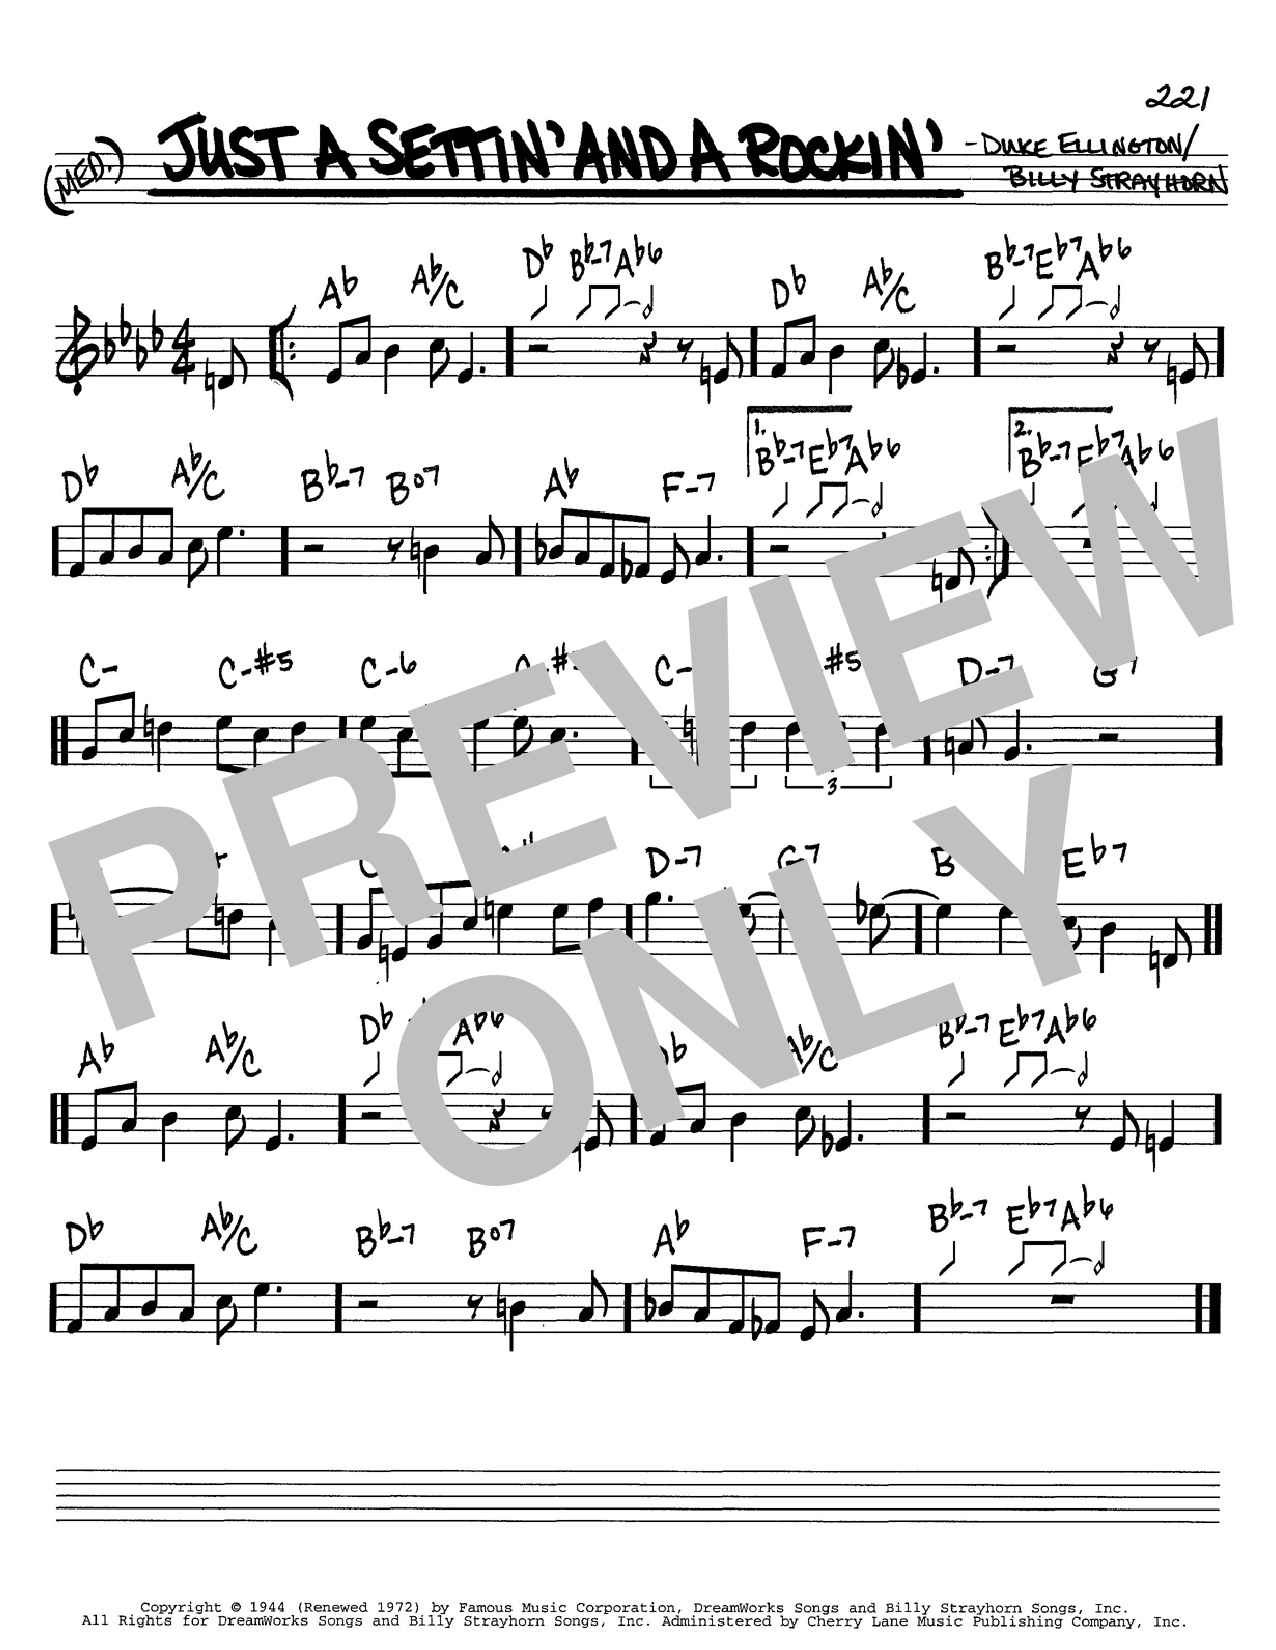 Duke Ellington Just A Settin' And A Rockin' sheet music notes and chords. Download Printable PDF.